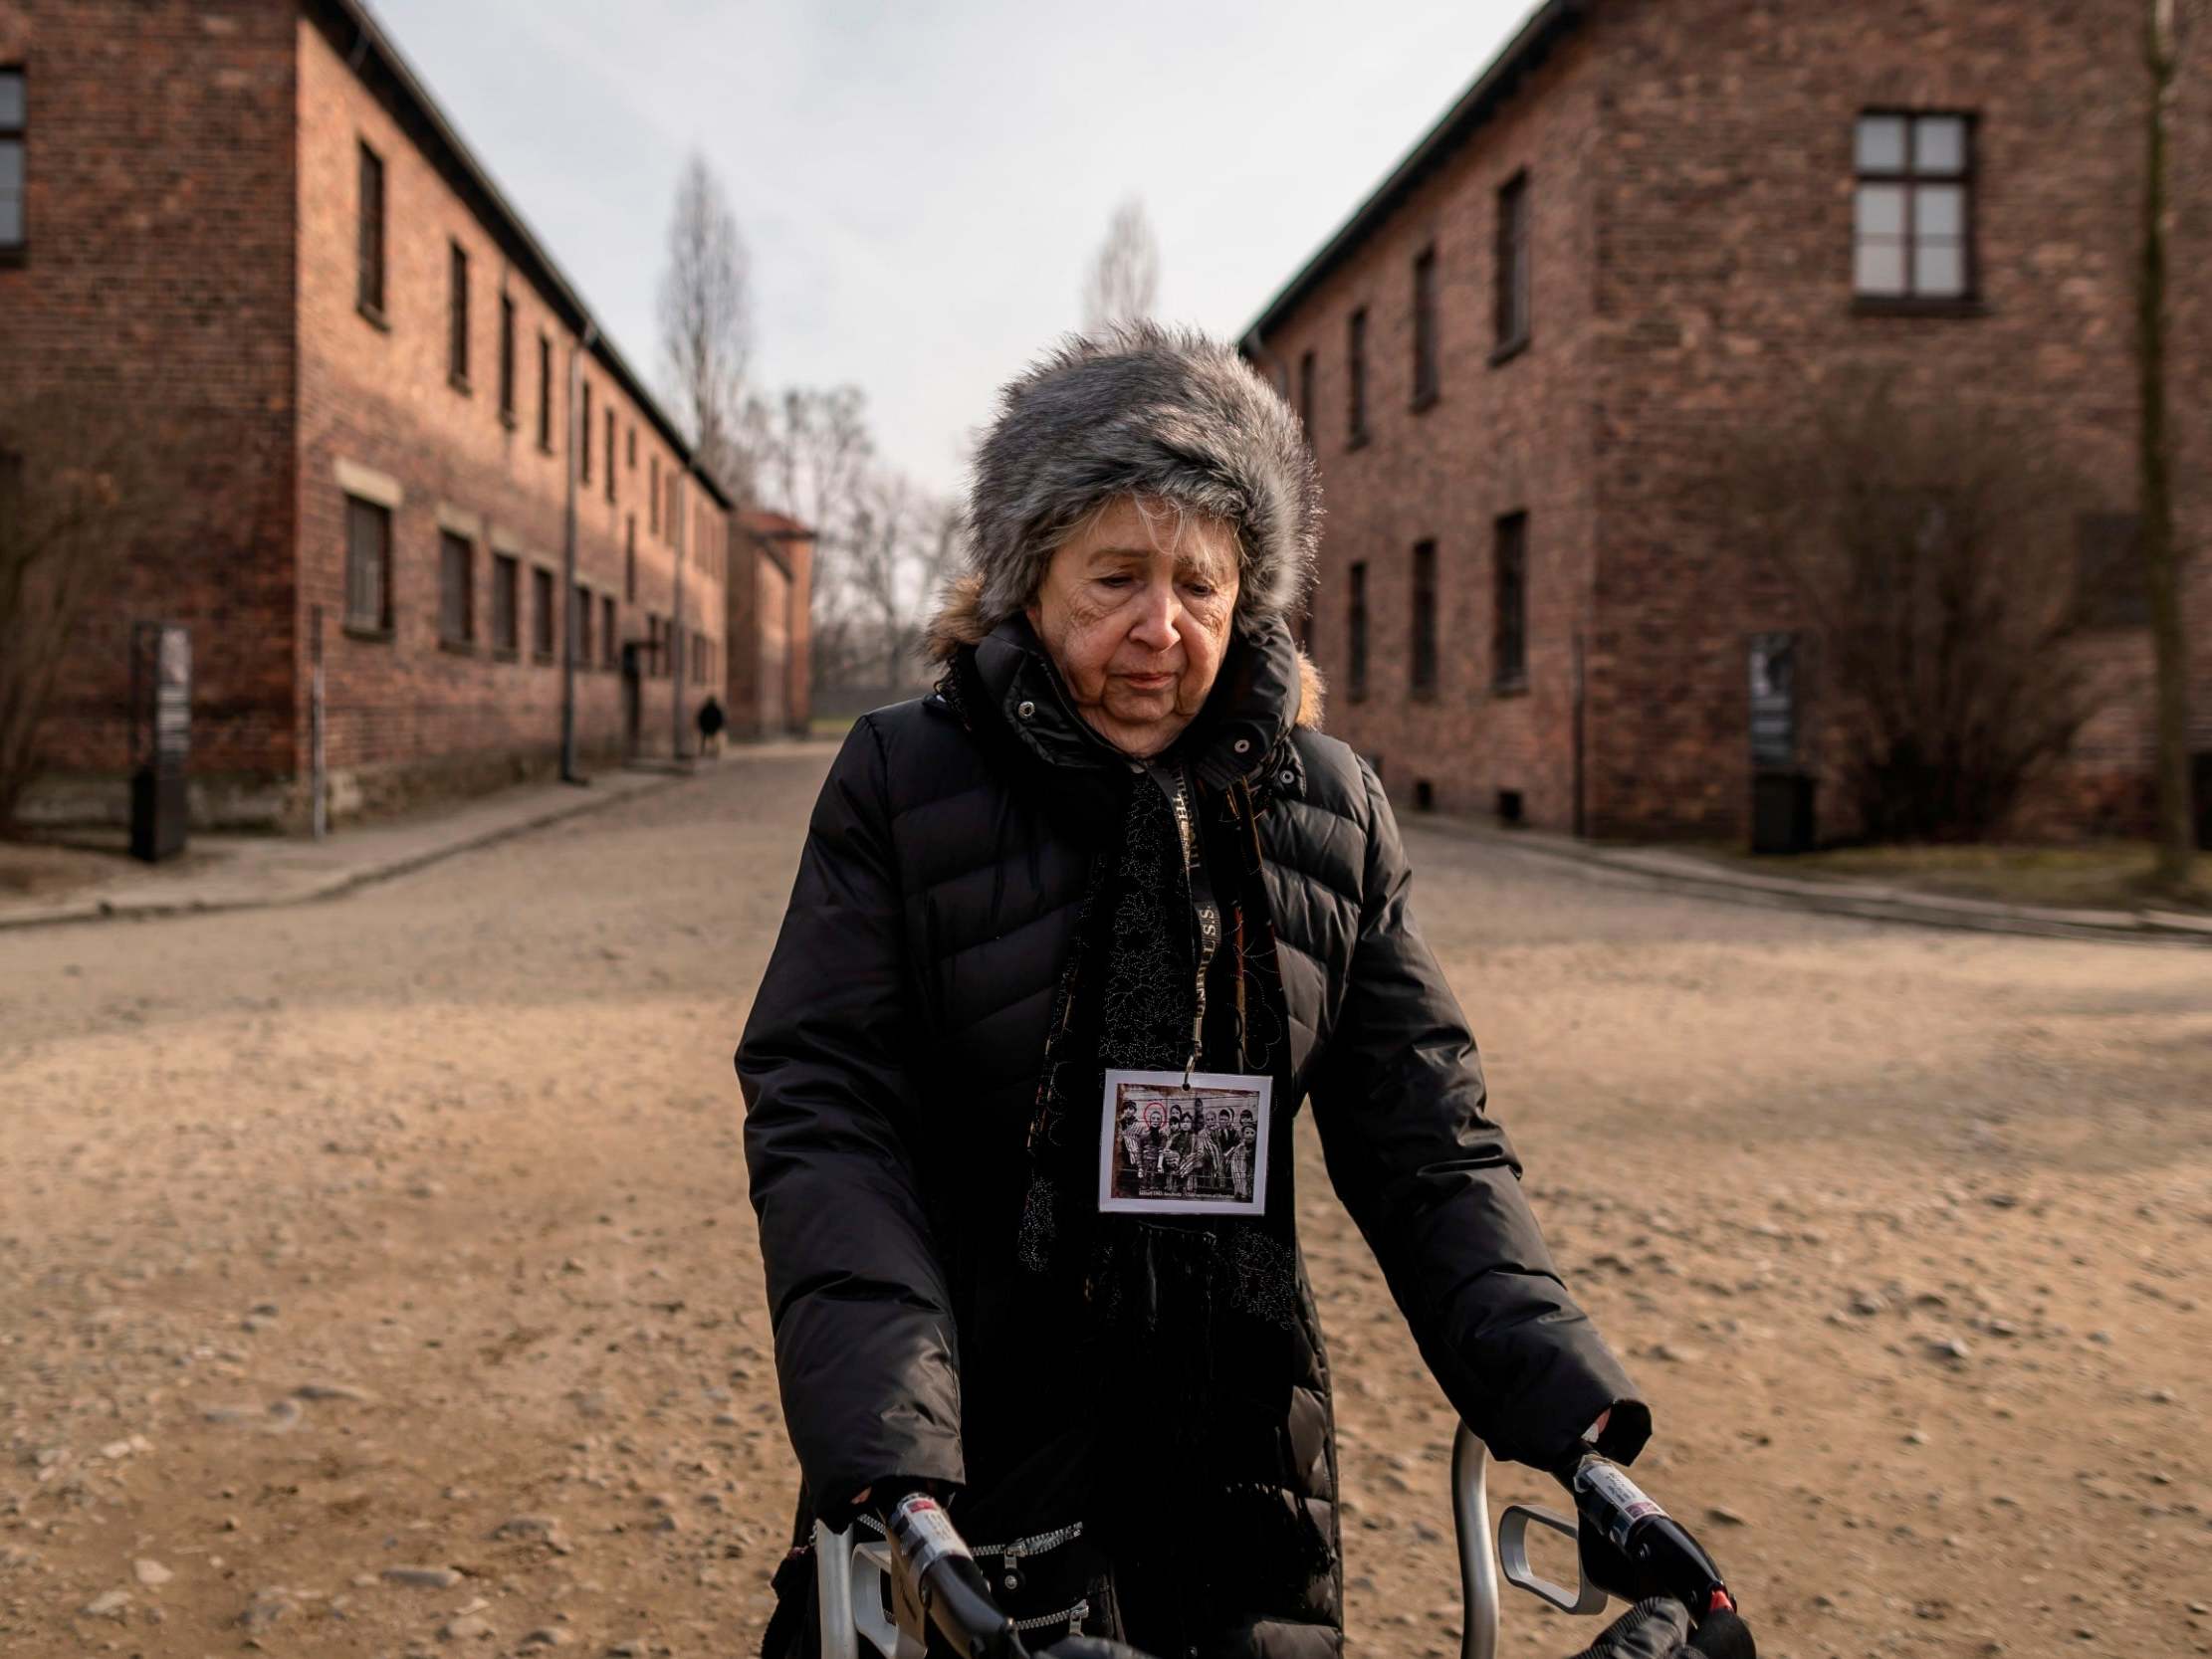 Holocaust survivor Miriam Ziegler visits Auschwitz, 75 years after she was liberated from it (AFP via Getty)